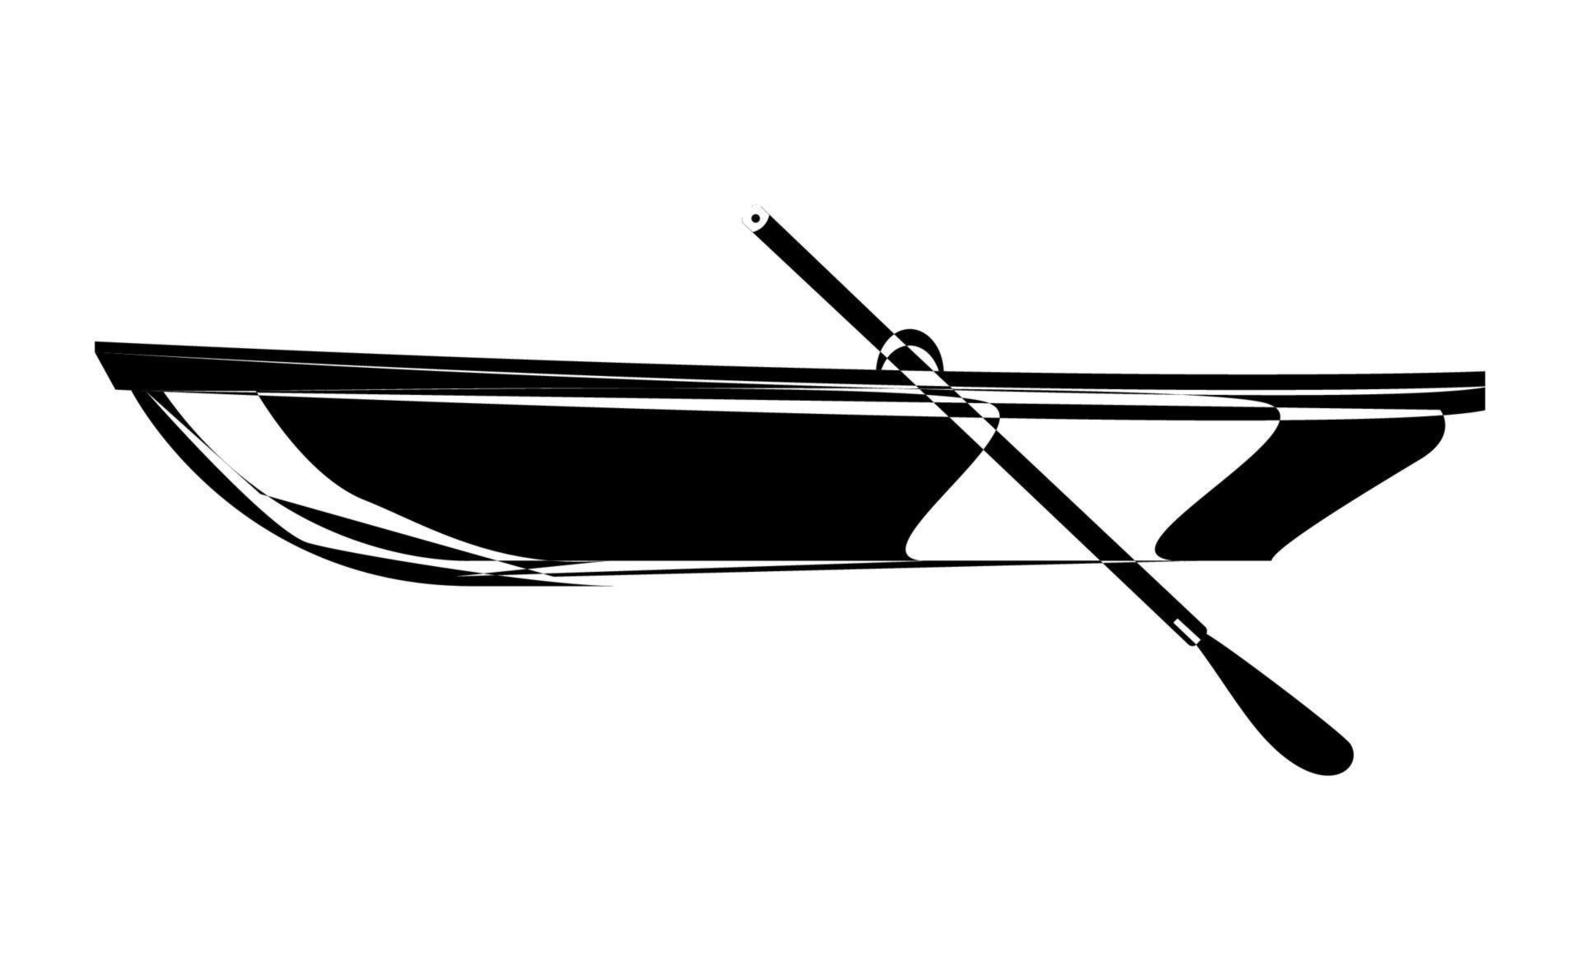 Wooden boat icon. Simple black boat silhouette. Outline vector illustration isolated on white background.